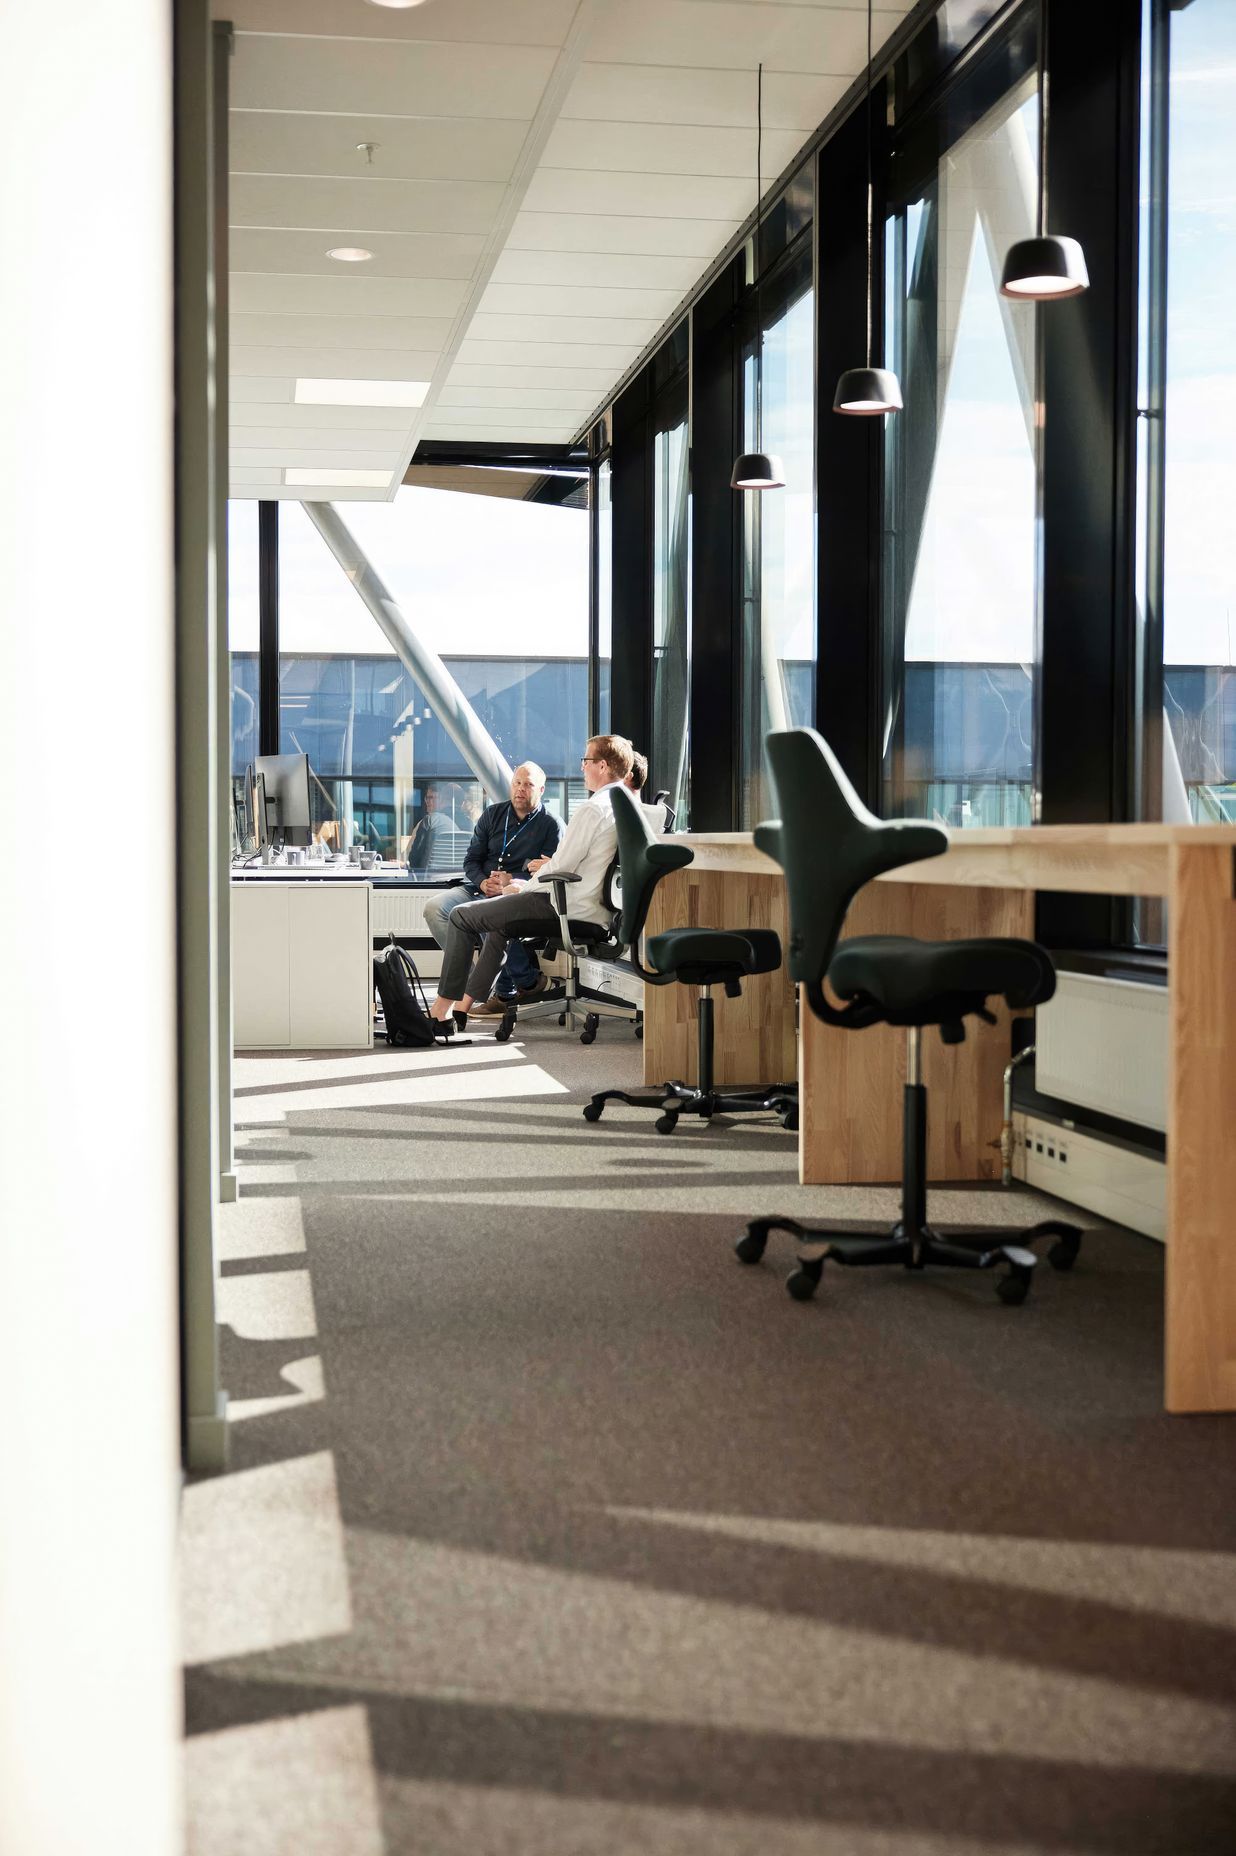 The HÅG Capisco is designed to encourage continuous postural movement throughout the day. Its open design and easy to use controls make it the perfect chair for shared spaces.